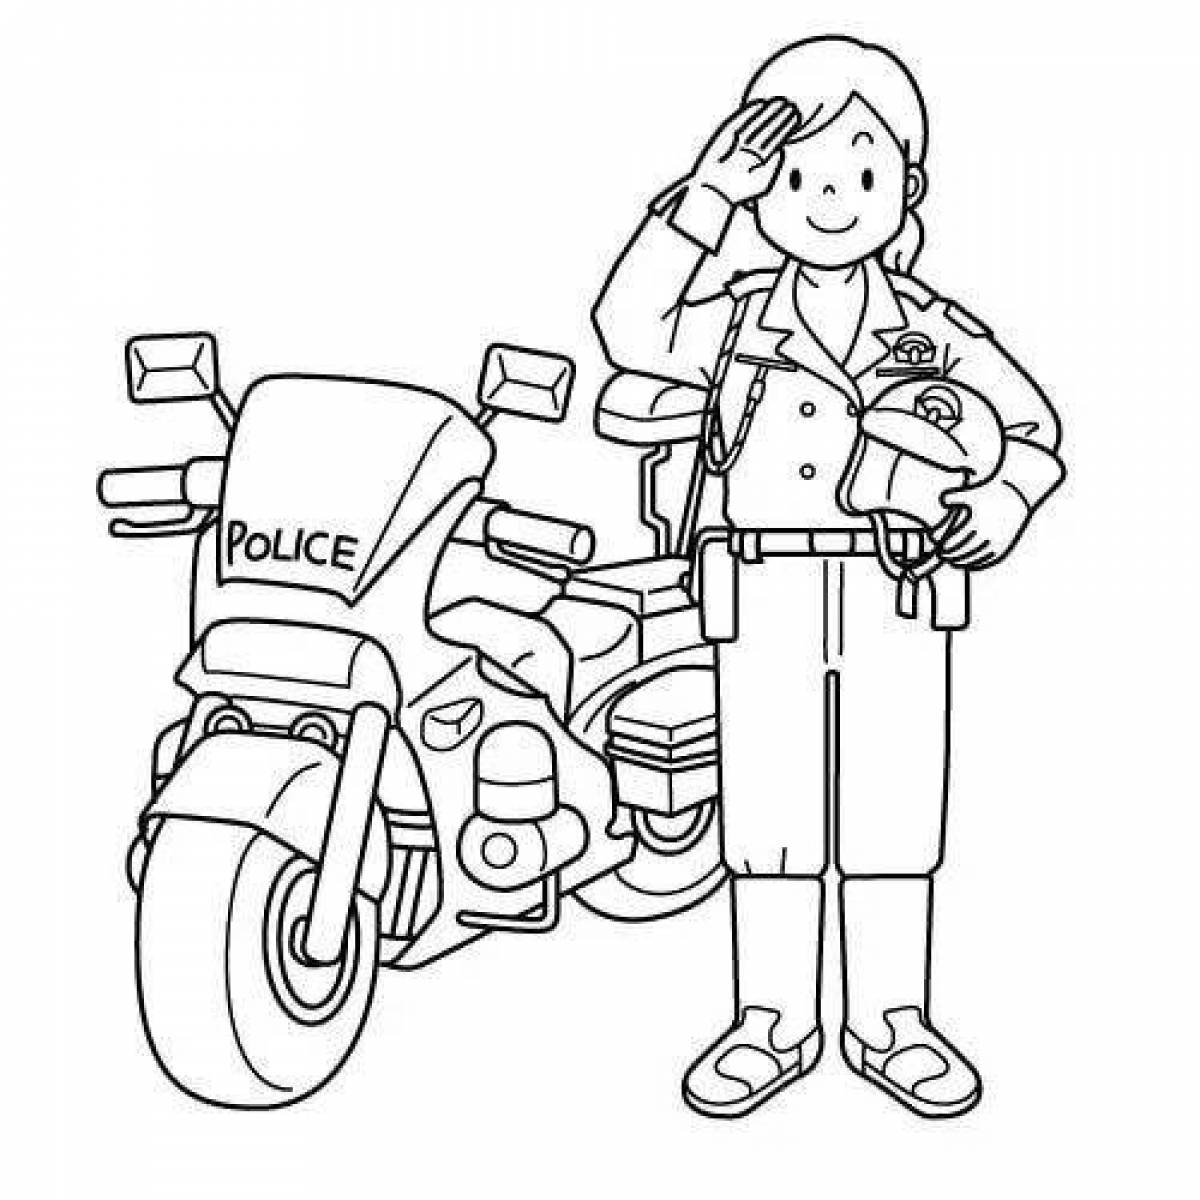 Fascinating coloring pages of professions in transport